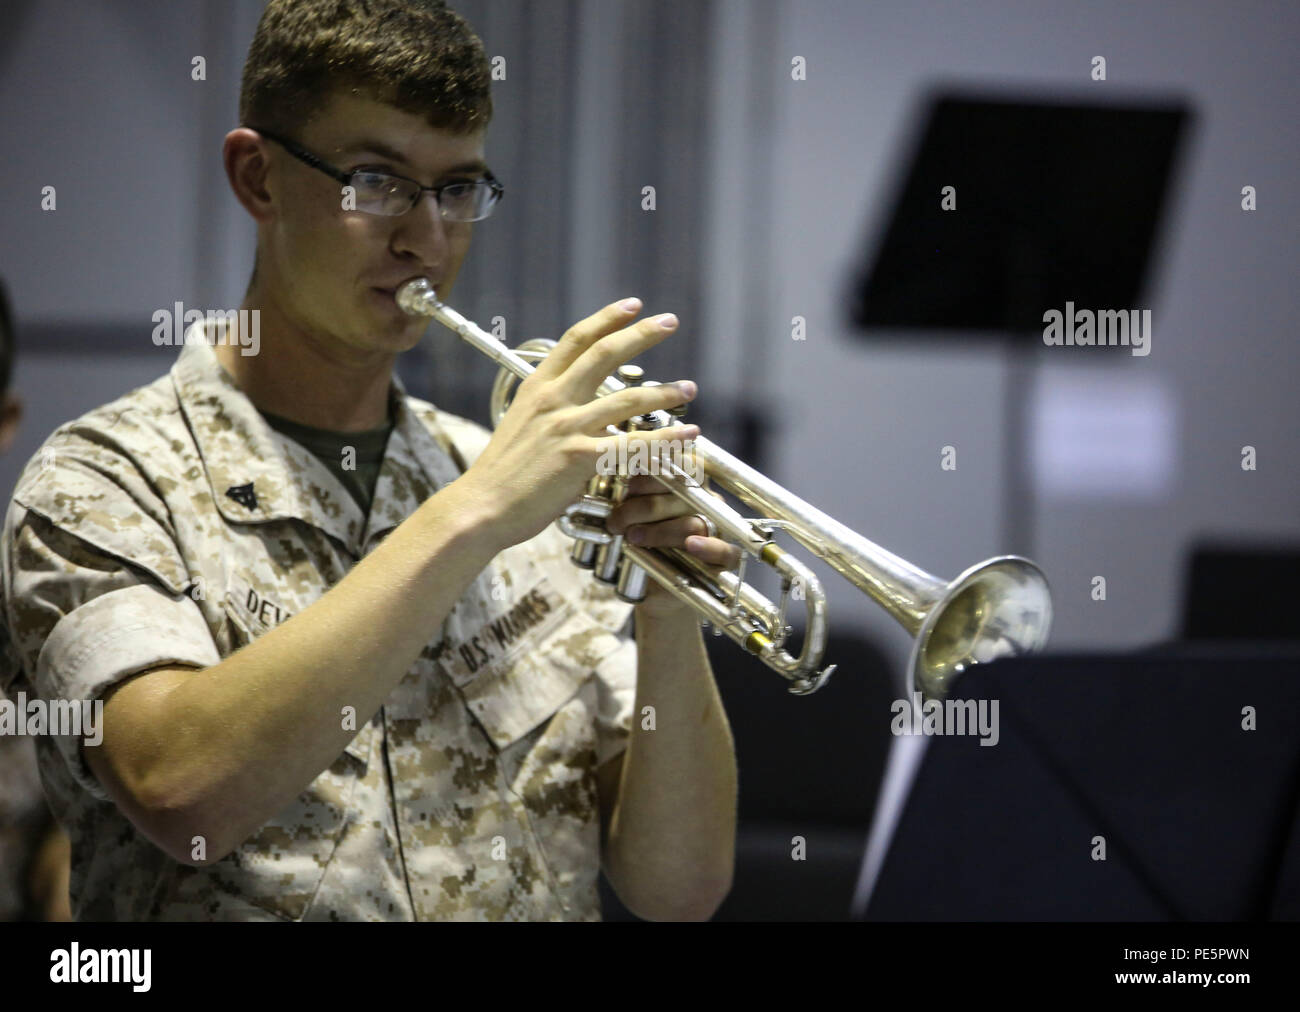 Cpl. Lucas T. Devalder, a trumpeter with the 2nd Marine Division Band plays for Amber N. Carter, a resident of Hubert, N.C., during her visit to the band’s command post at Camp Lejeune, N.C., Sept. 29, 2015. Amber always dreamed of joining the Marine Corps, but could not due to William’s syndrome. Staff Sgt. Isaiah Riley, a mess chief with 10th Marine Regiment, brought her and her family aboard the base to watch the band play. (U.S. Marine Corps photo by Cpl. Paul S. Martinez/Released) Stock Photo